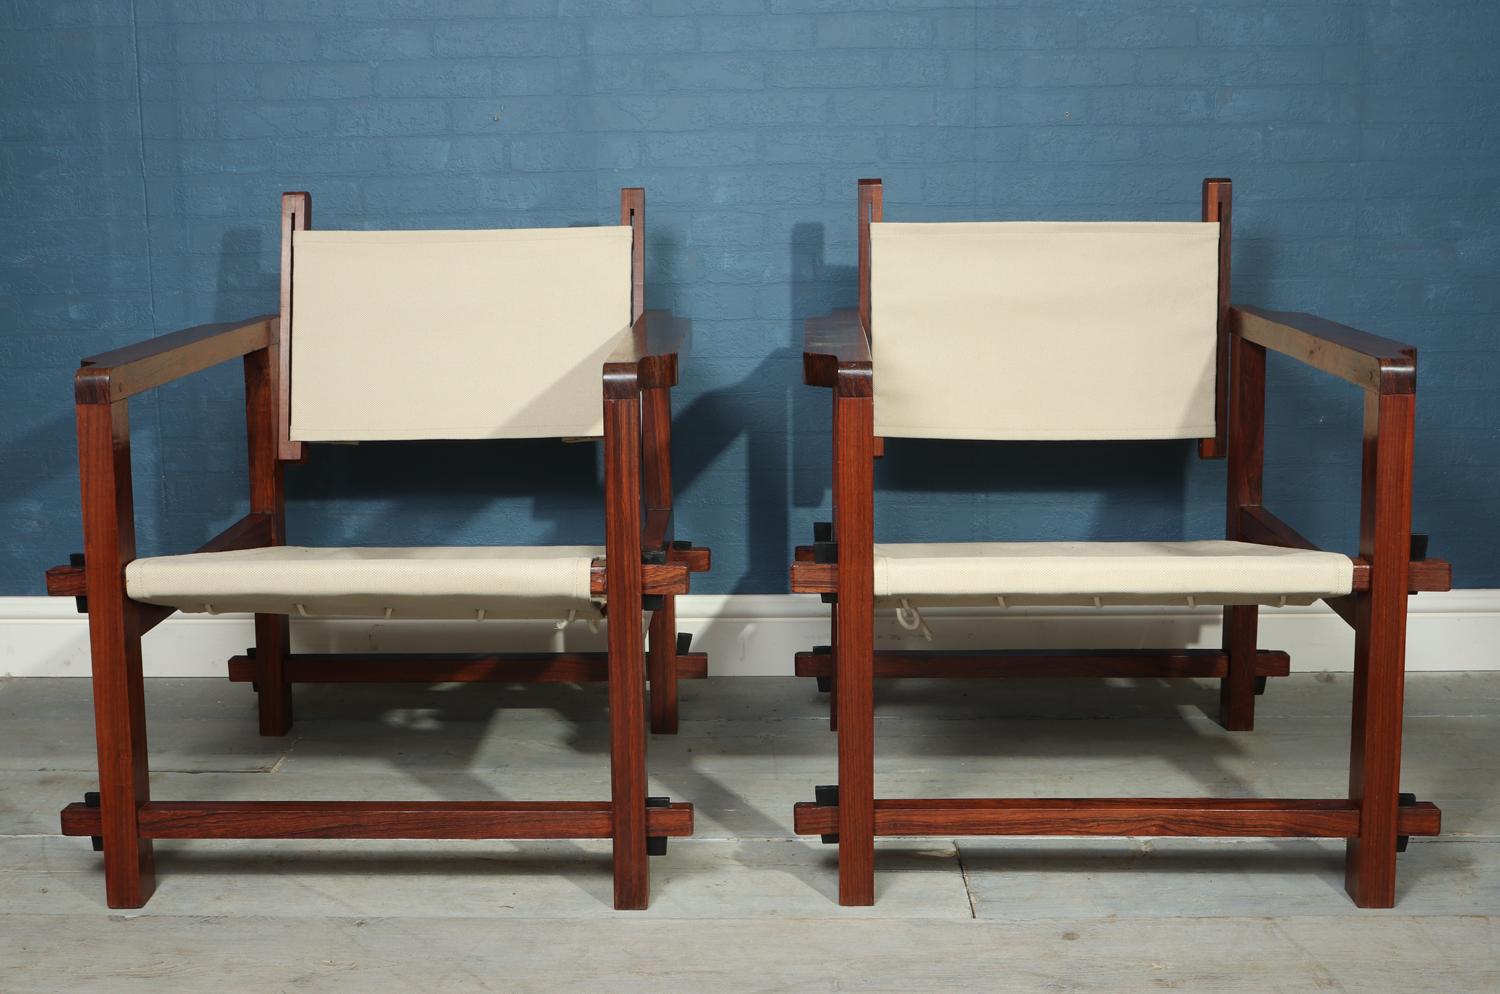 Pair of Brazilian midcentury sling chairs
A pair of Brazillian produced midcentury sling chairs solid rosewood with peg joints and re covered upholstery, the chairs are in excellent condition throughout

Age: circa 1960

Style: Mid-Century